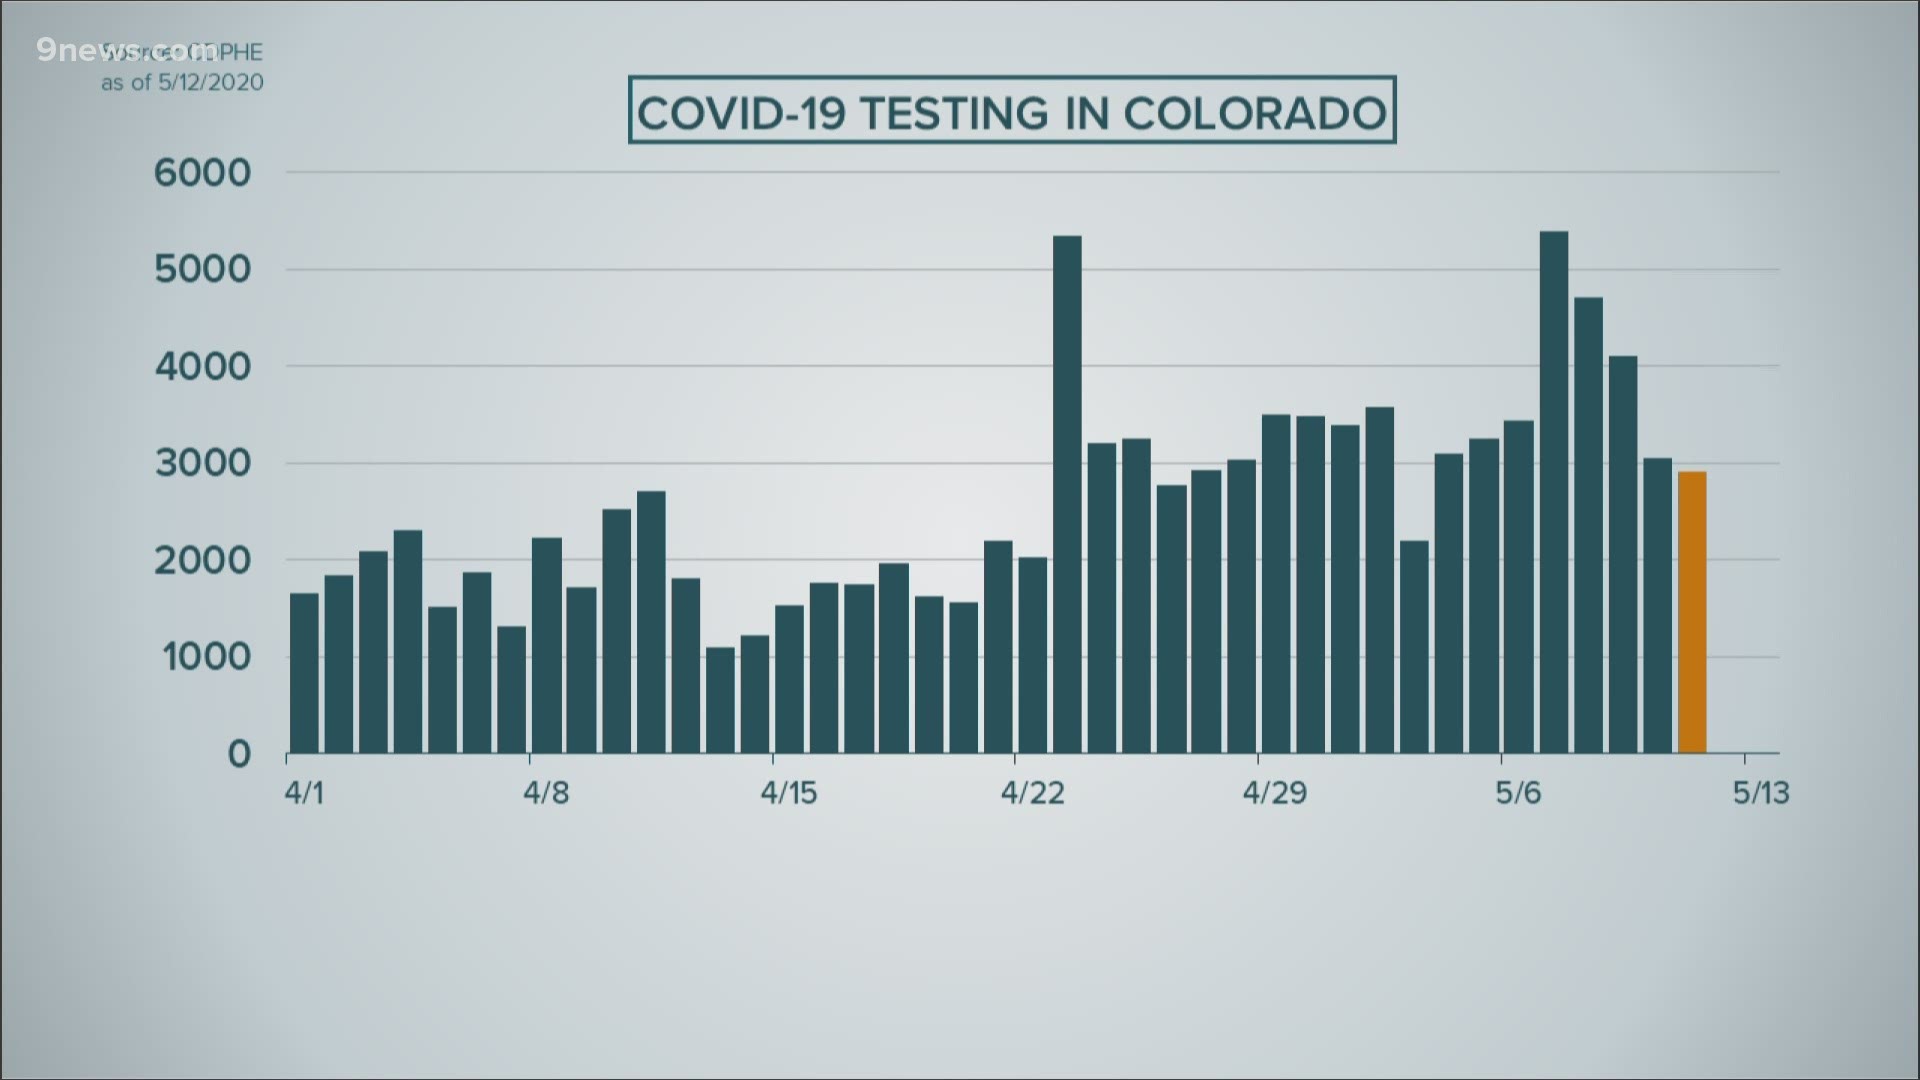 A rural nursing home says FEMA redirected PPE it ordered and Colorado sees more than 1,000 deaths related to COVID-19 as of May 12.